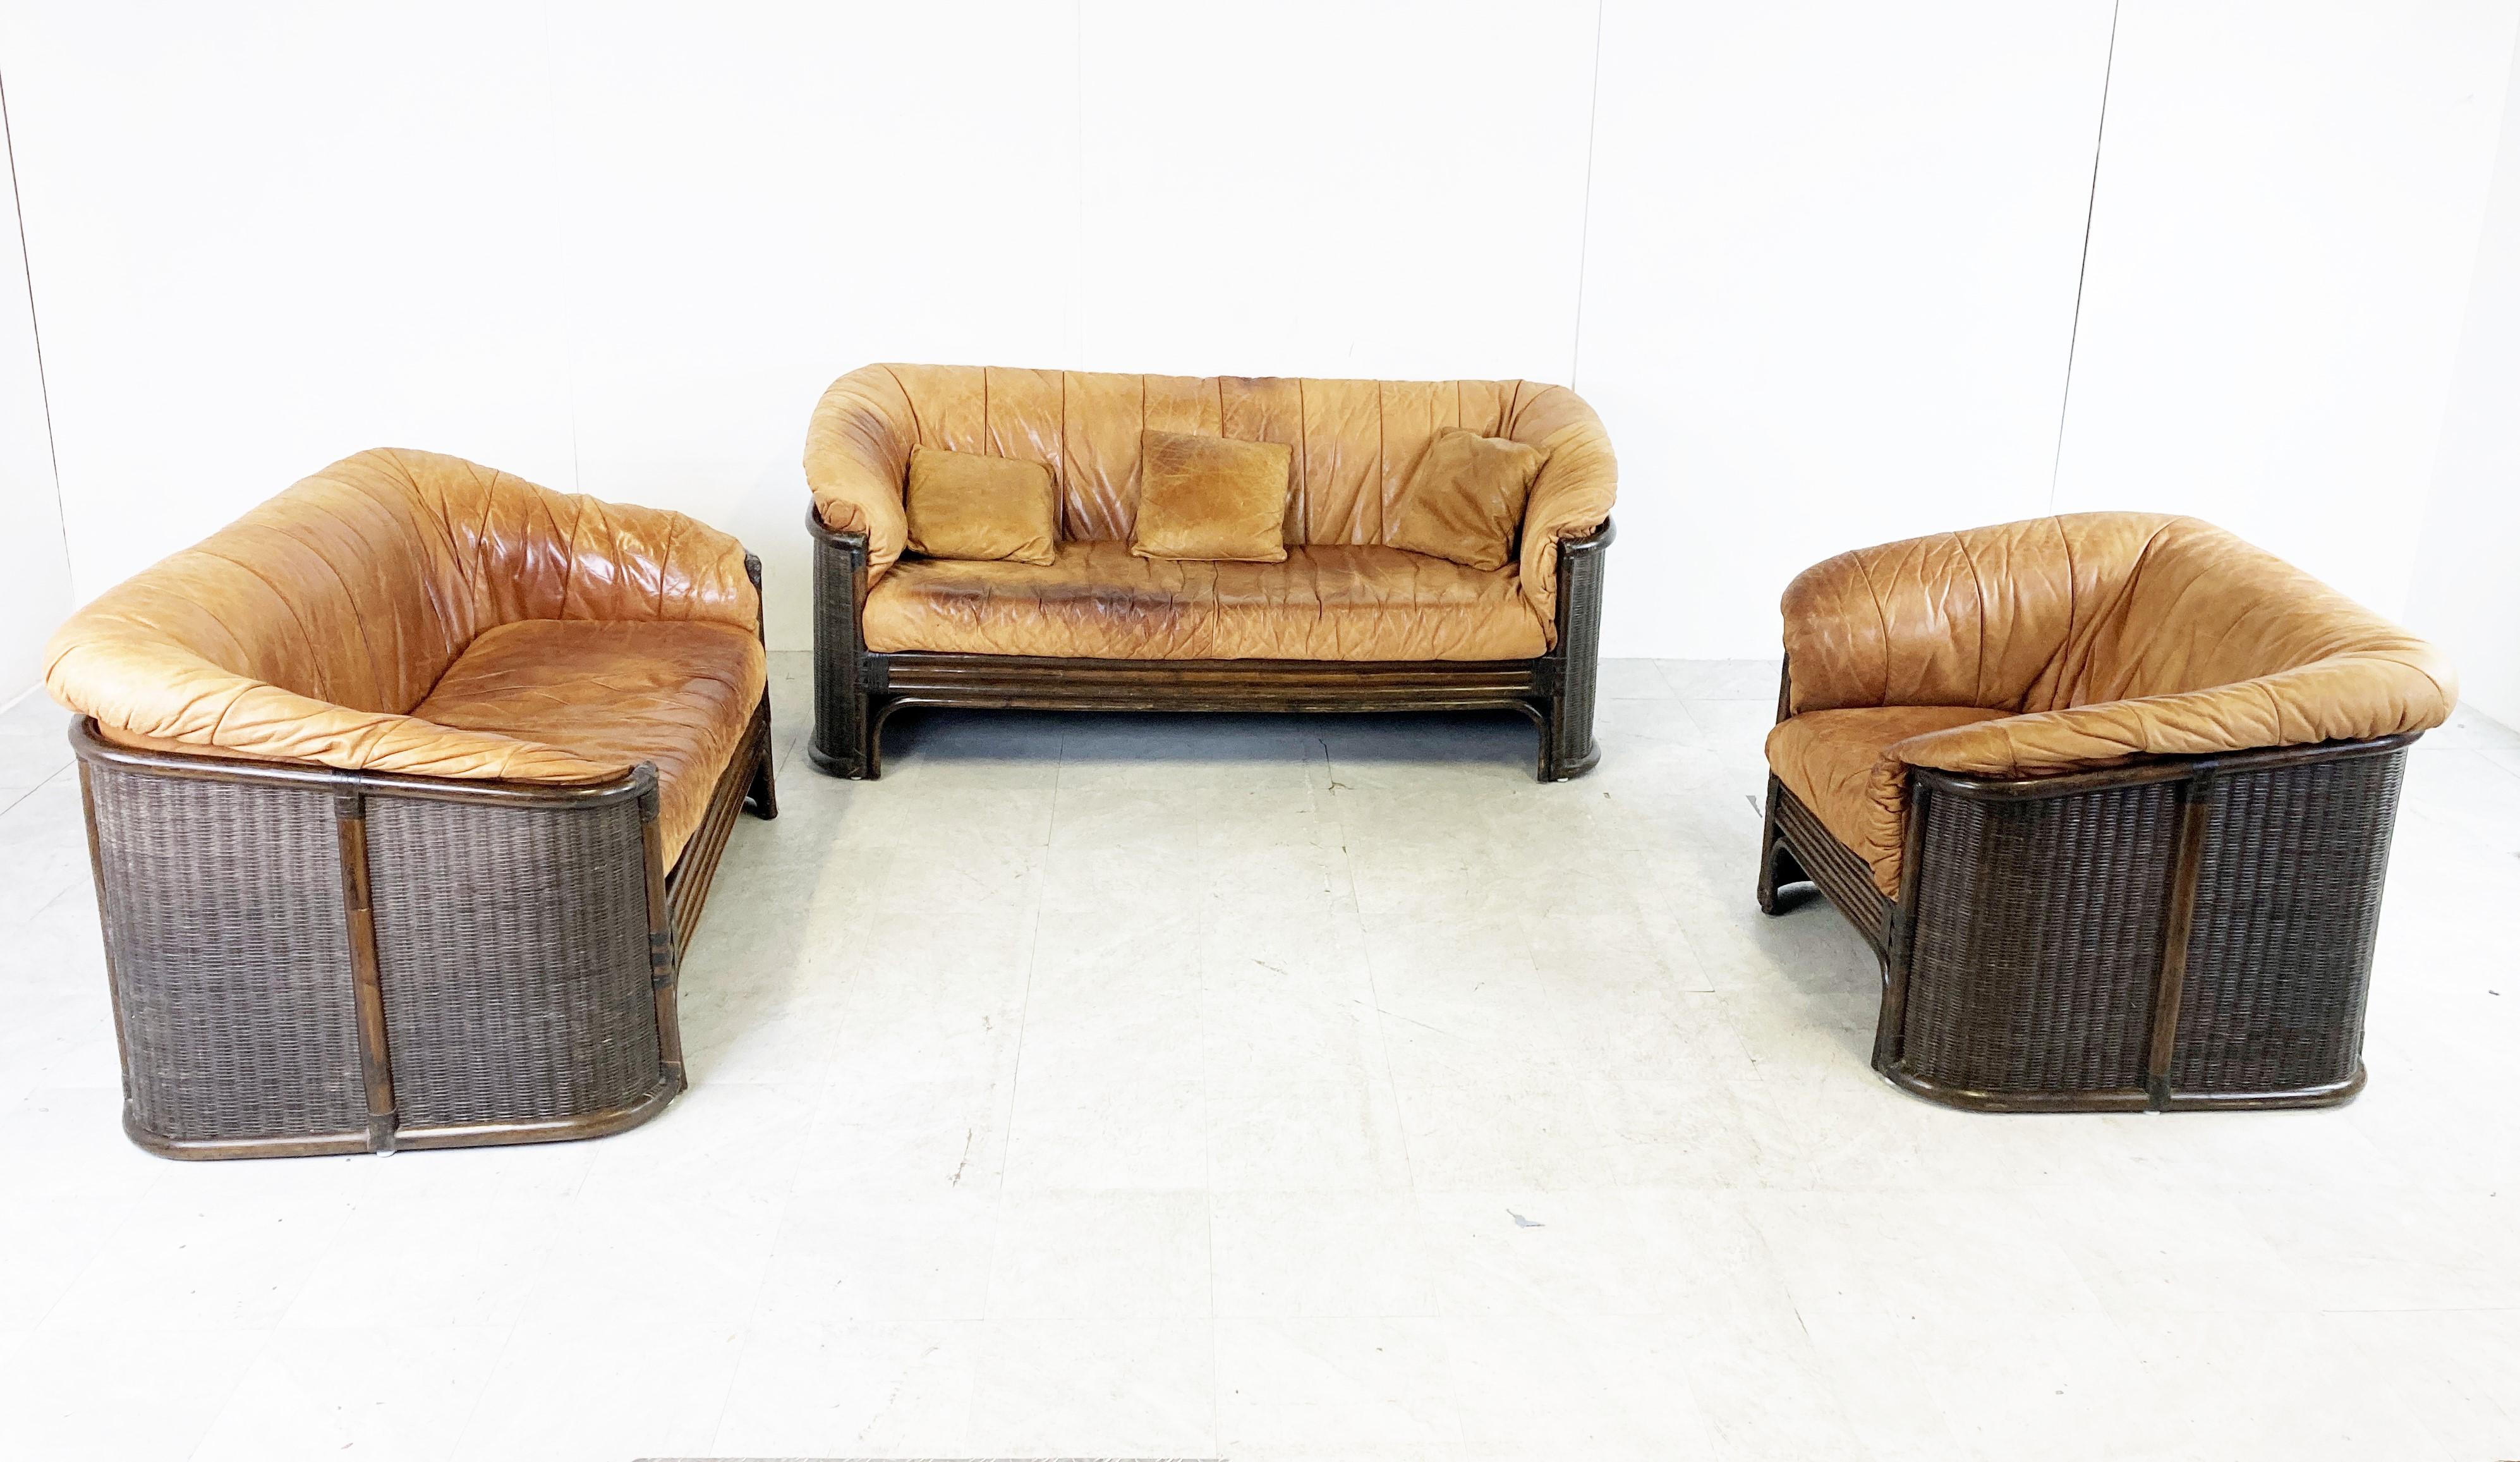 Mid-century wicker, bentwood and patinated leather sofa set.

The set consists of a 3, 2 and 1 seater sofa.

The leather is beautifully patinated and has the original cushions.

1960s - France

Dimensions
3 seater:
Height: